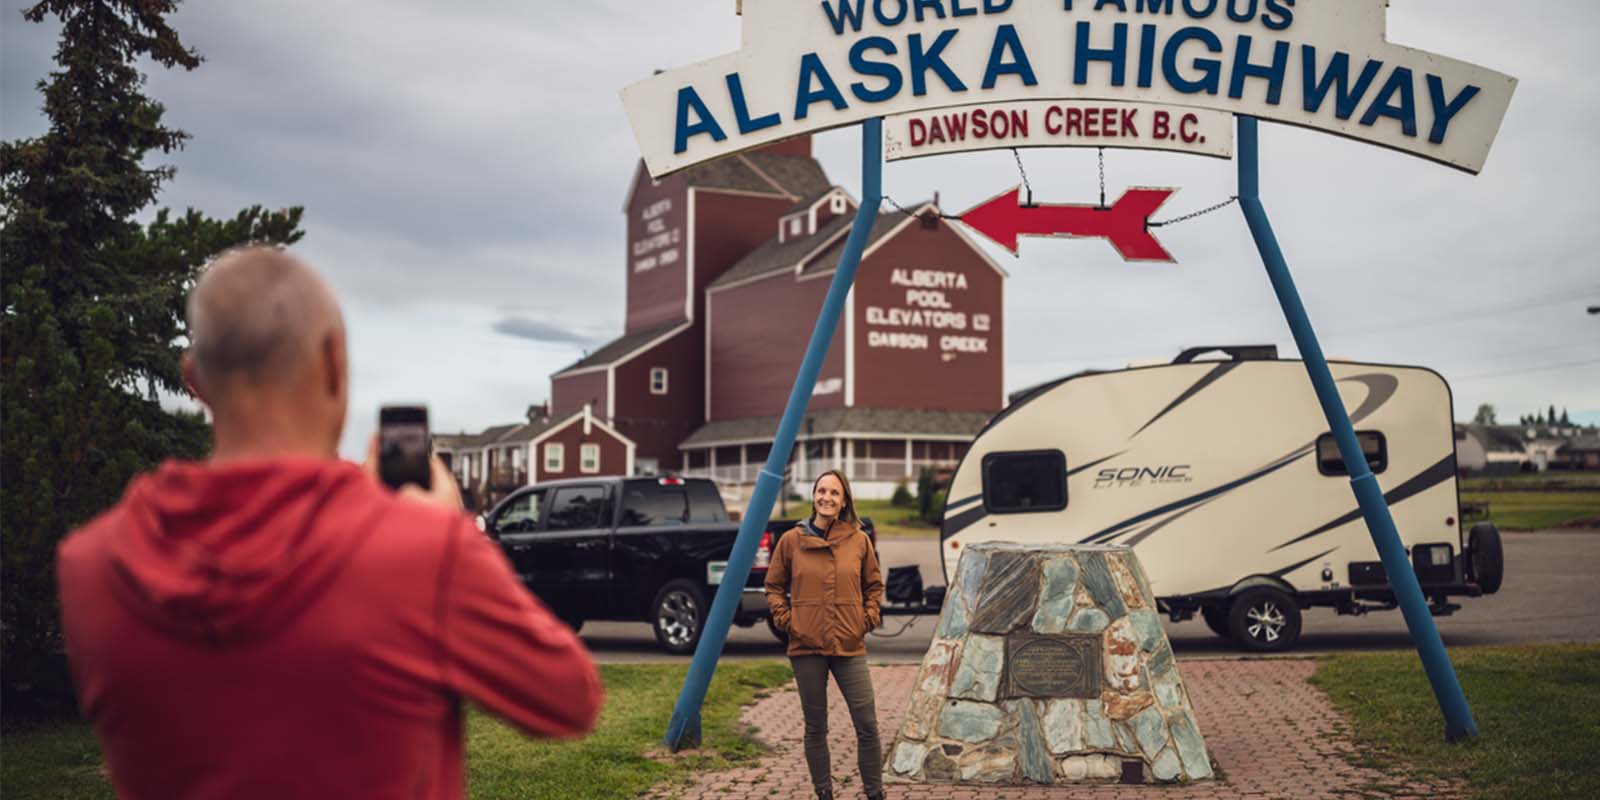 couple taking photo by RV at alaska highway sign